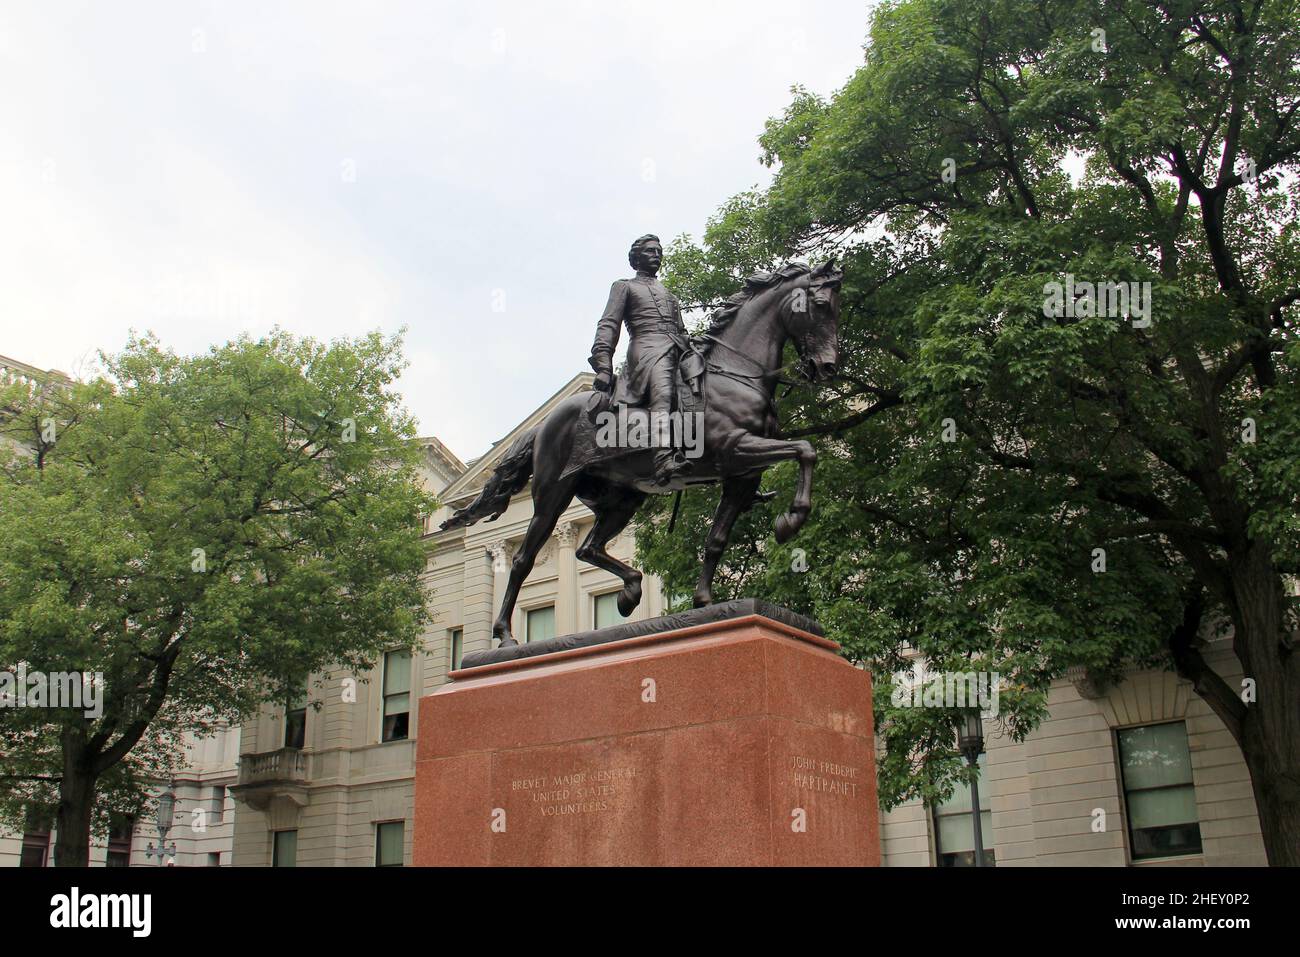 Equestrian statue of John F. Hartranft, Major General in the Union Army during the Civil War, the Governor of Pennsylvania in 1873 - 1879, Harrisburg Stock Photo